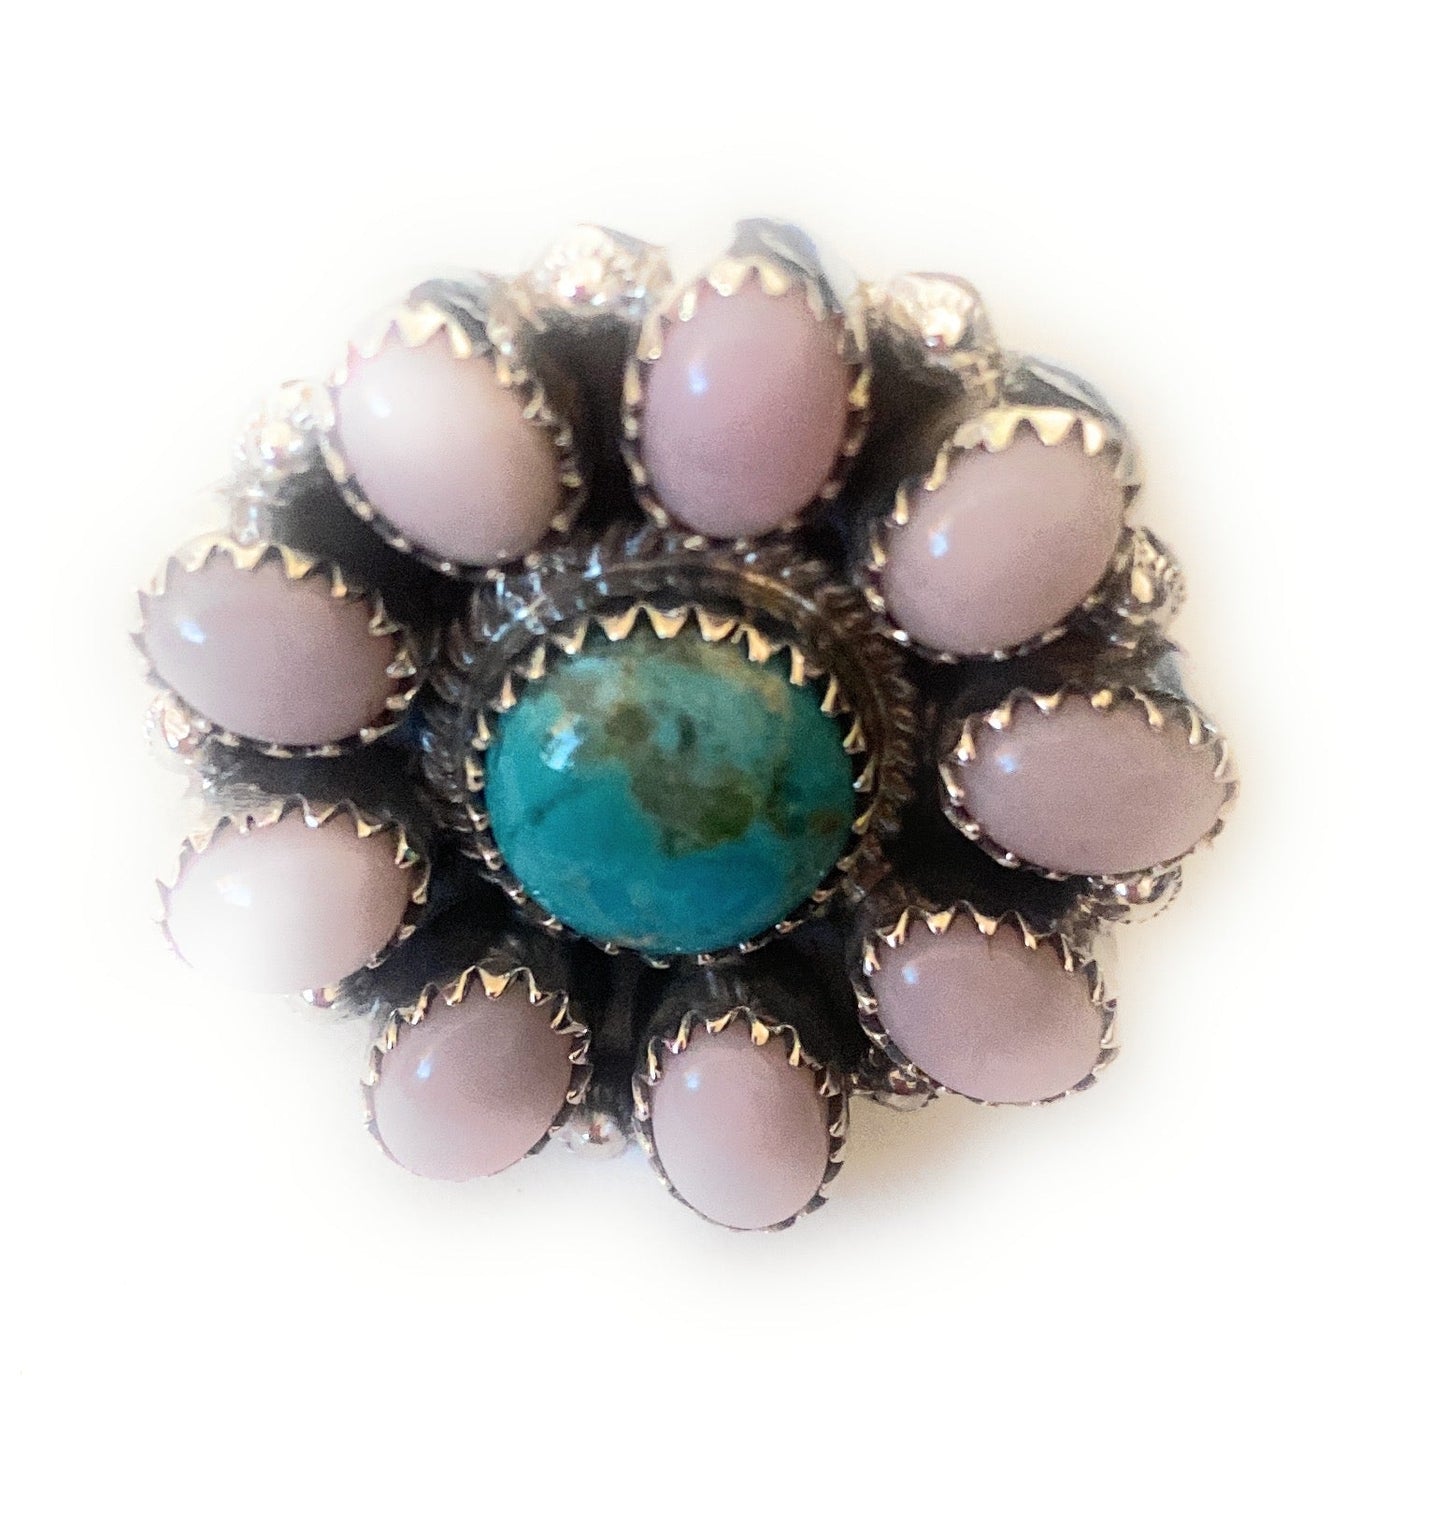 Handmade Sterling Silver, Mother of Pearl & Turquoise Cluster Adjustable Ring